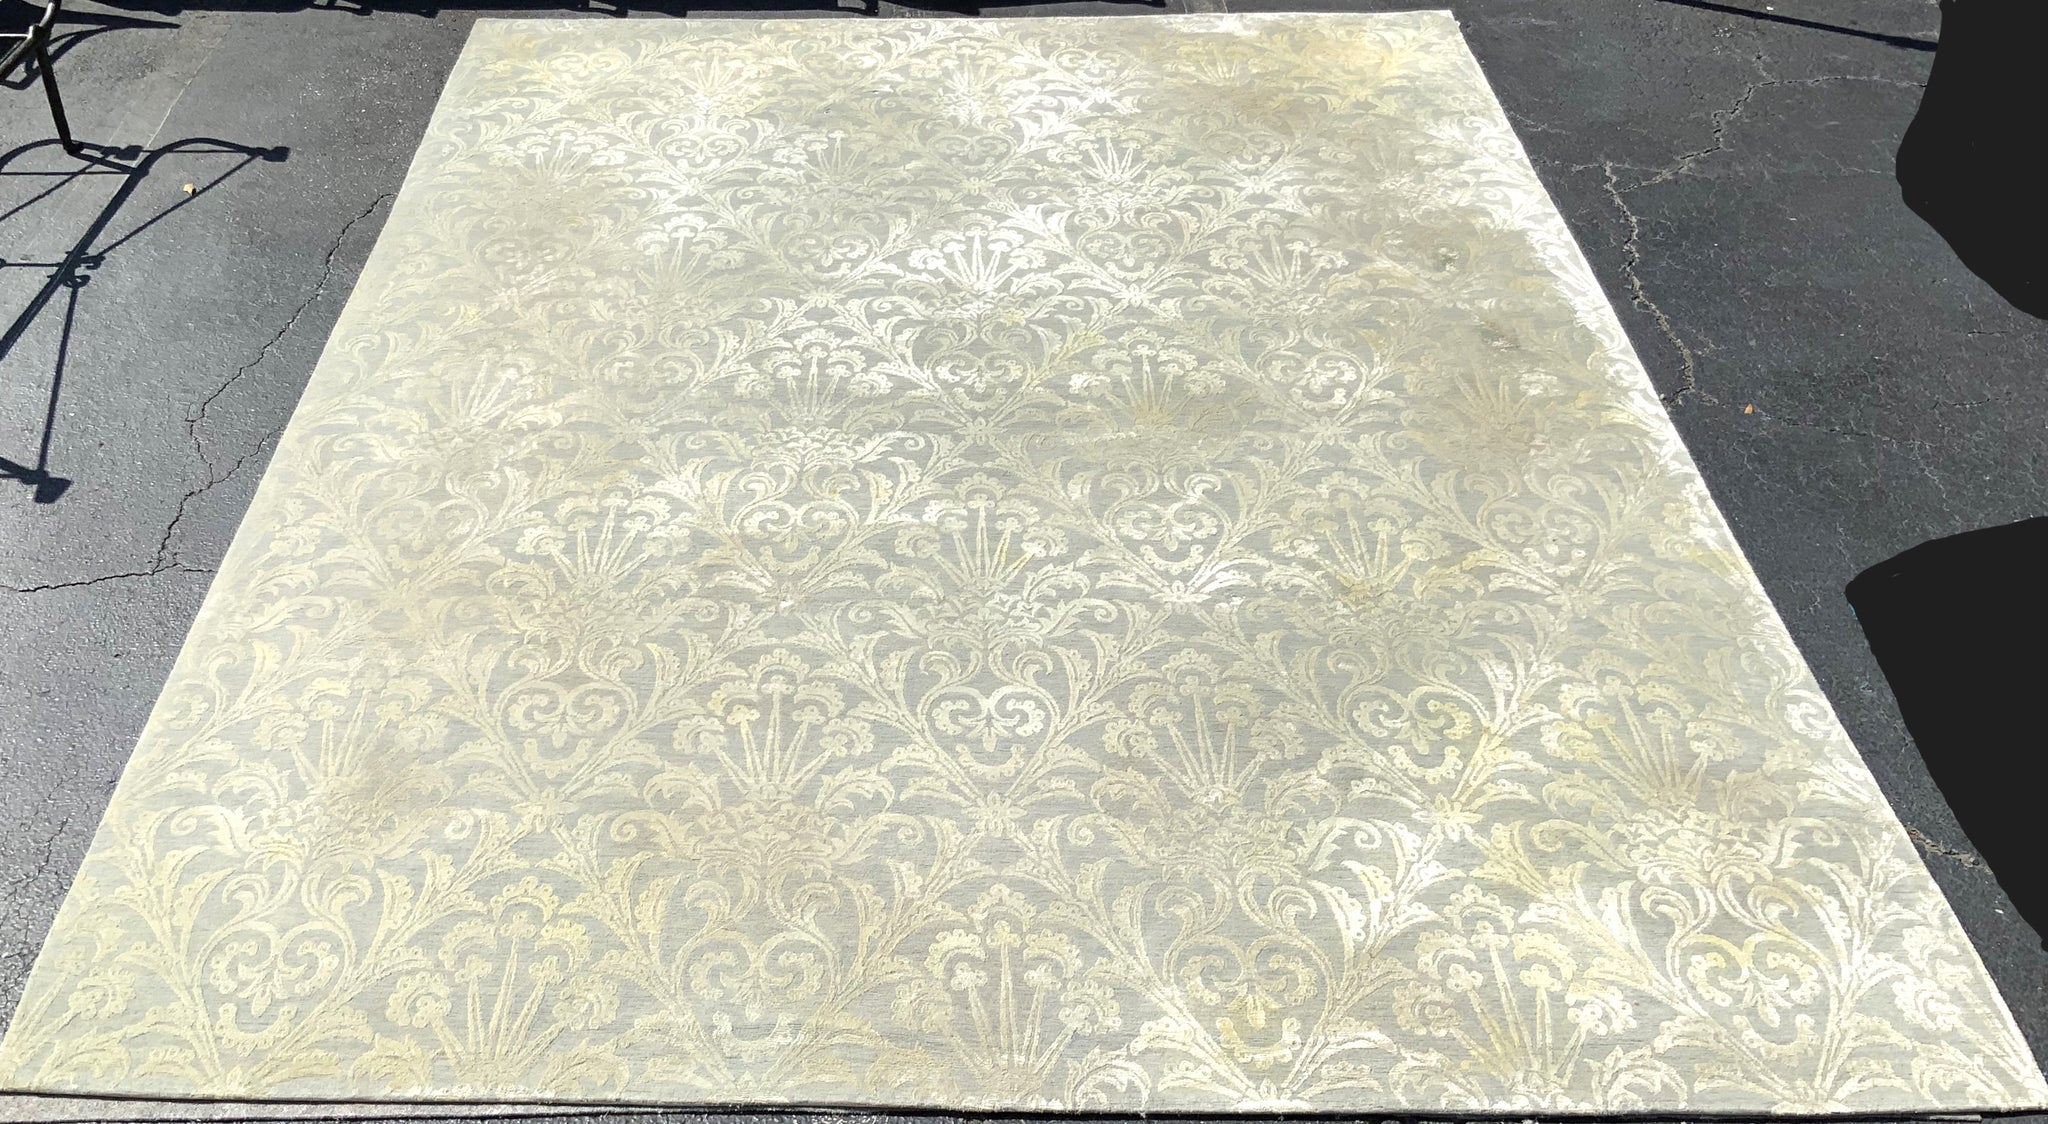 Beige & Gray Wool Rug with Damask Design 9'x12'